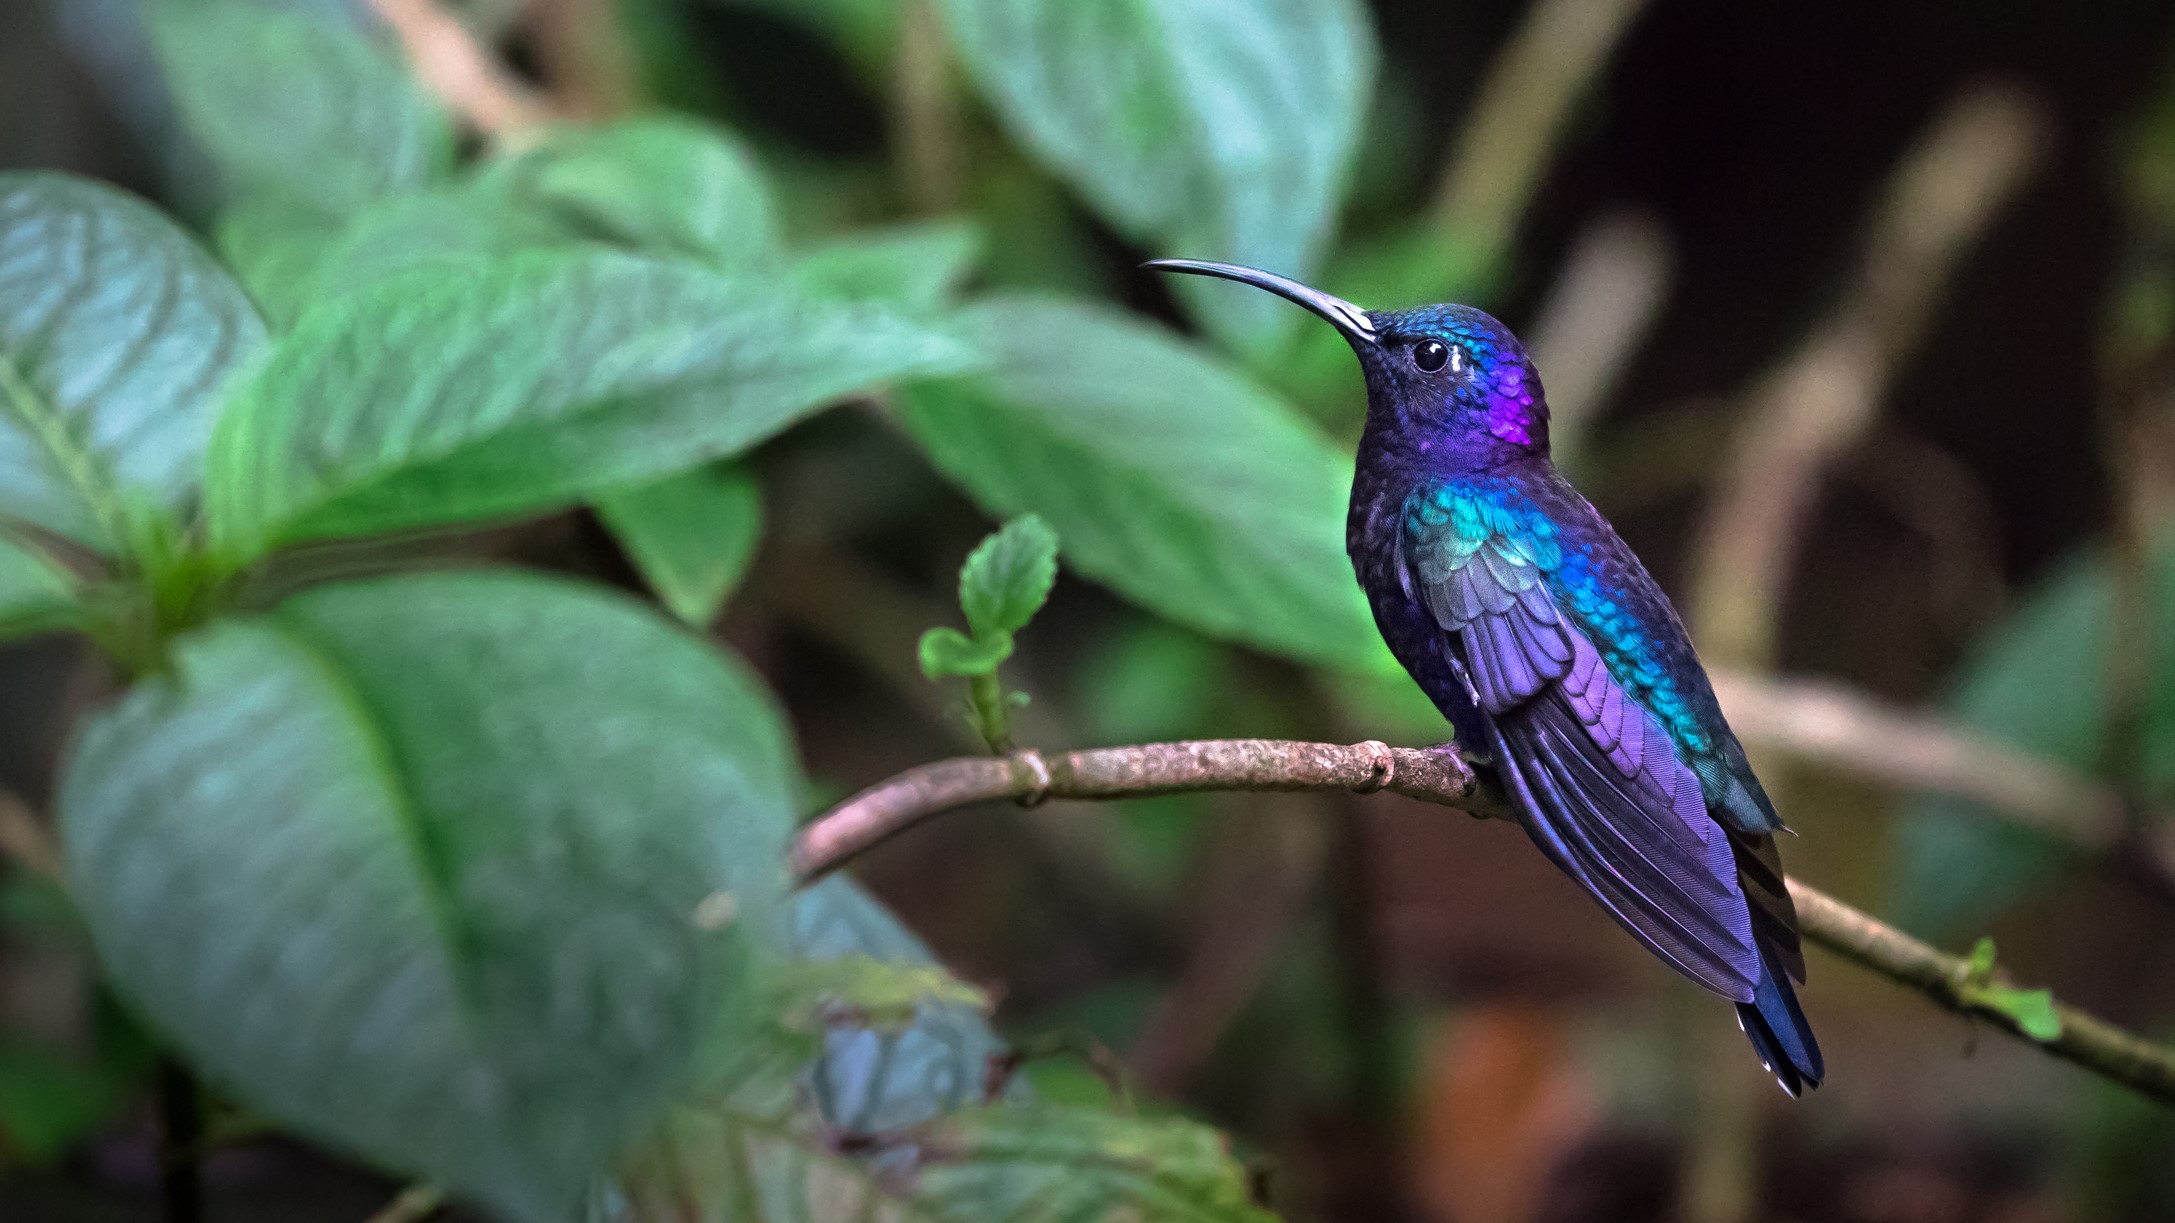 A violet sabrewing perched on a branch with a leafy background.